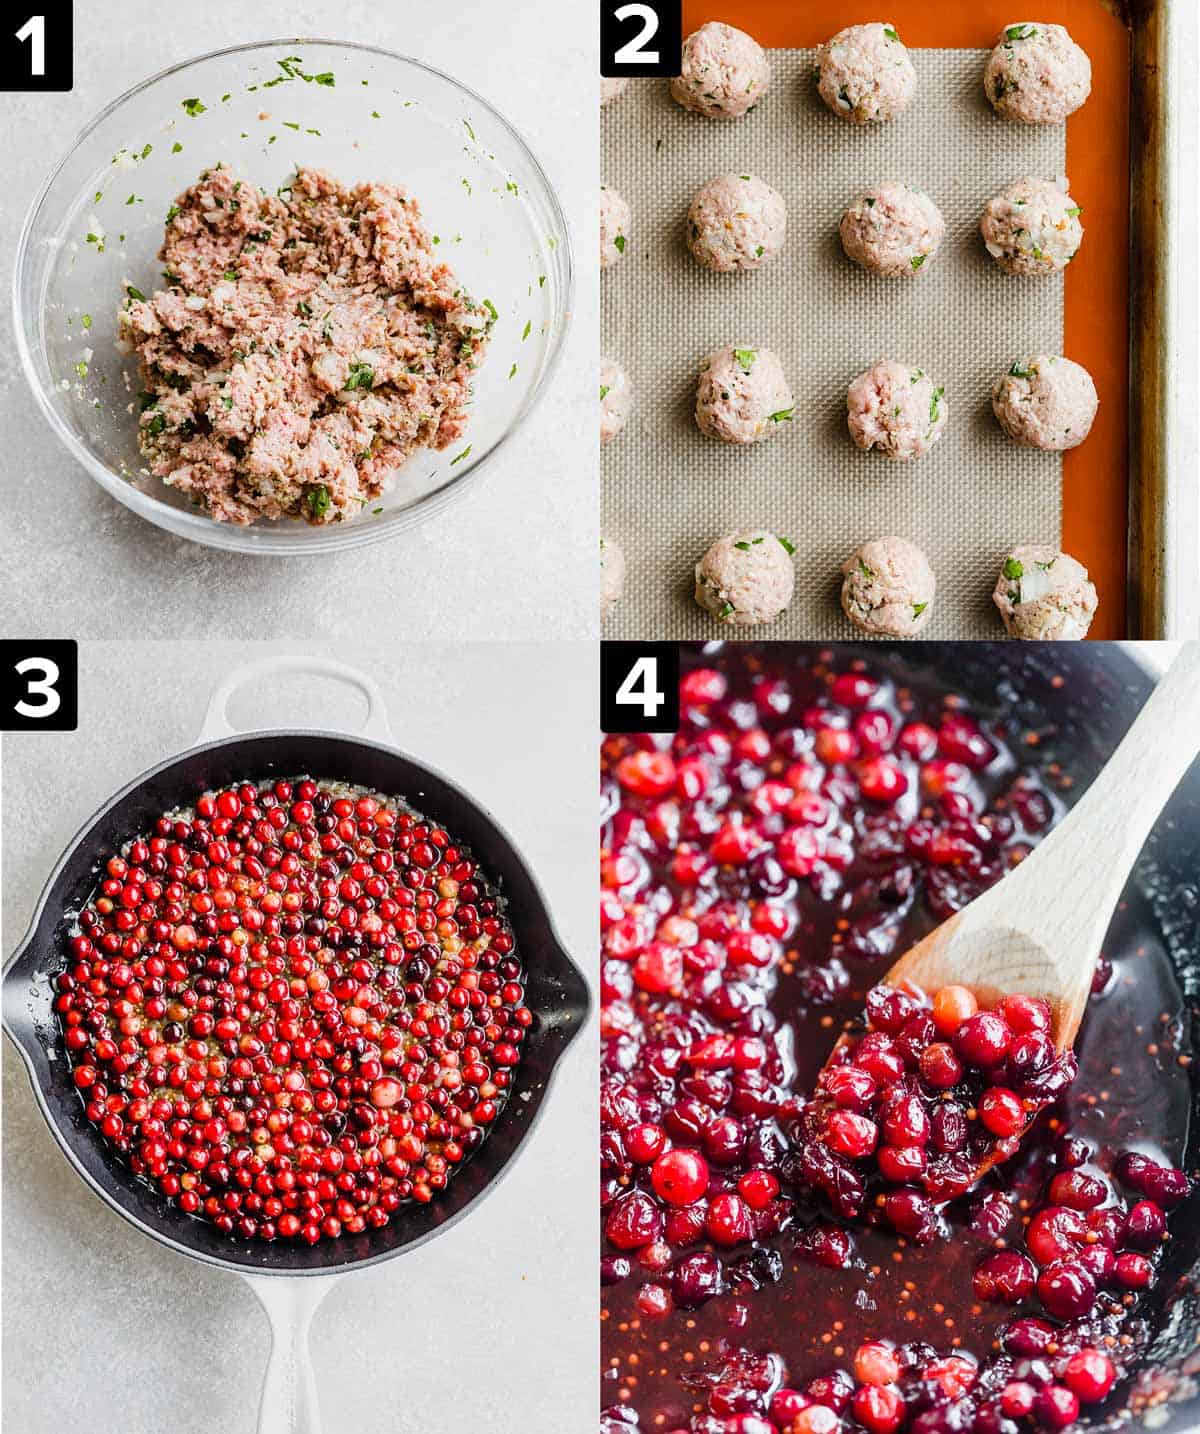 Four images showing how to make Cranberry Turkey Meatballs: top left has turkey meatballs ingredients in a bowl, top right is small turkey meatballs on baking sheet, bottom two photos are making cranberry chutney.